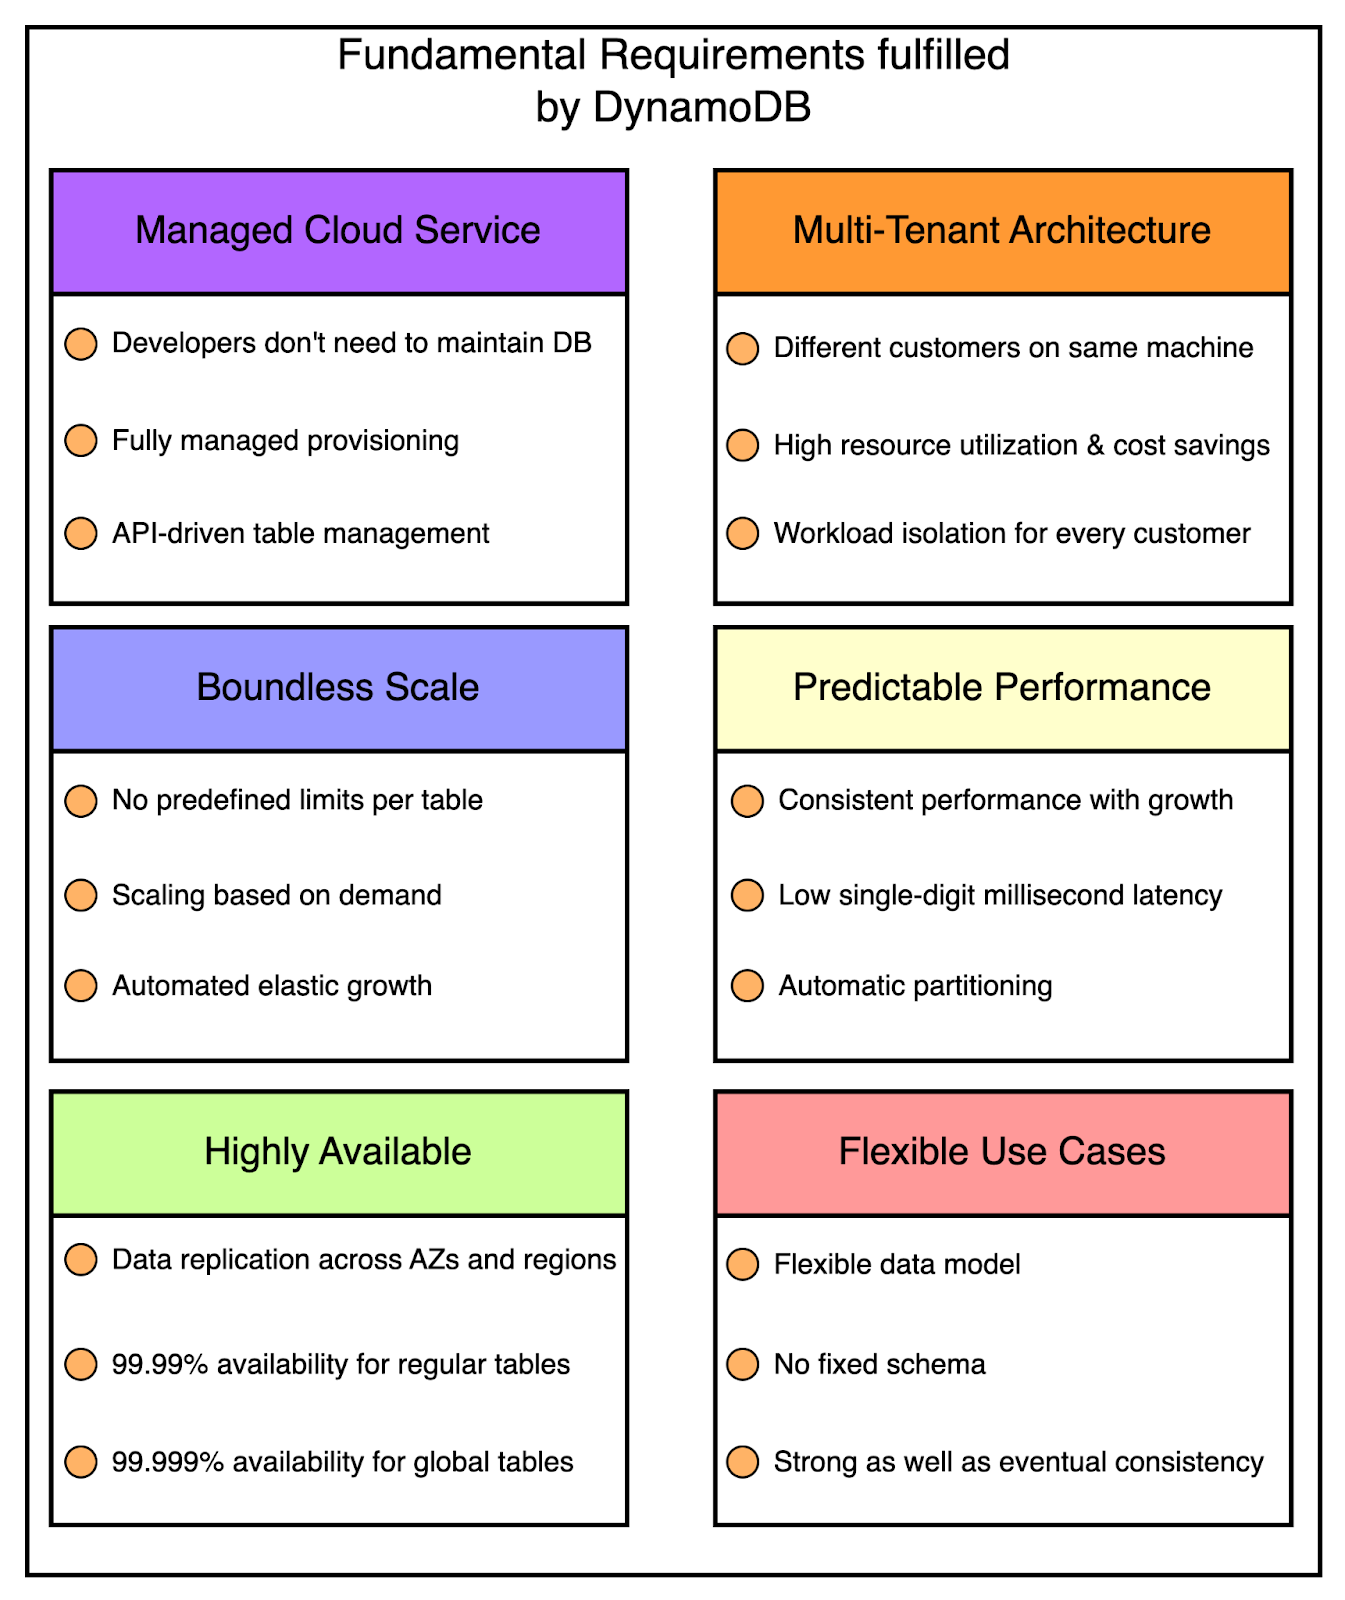 Fundamental Requirements fulfilled 
by DynamoDB 
Managed Cloud Service 
O Developers don't need to maintain DB 
O Fully managed provisioning 
O API-driven table management 
Boundless Scale 
O No predefined limits per table 
O Scaling based on demand 
O Automated elastic growth 
Highly Available 
Multi-Tenant 
O Different customer: 
O High resource utiliz 
O Workload isolation 
Predictable F 
O Consistent perforn 
O Low single-digit m 
O Automatic partitior 
Flexible U 
